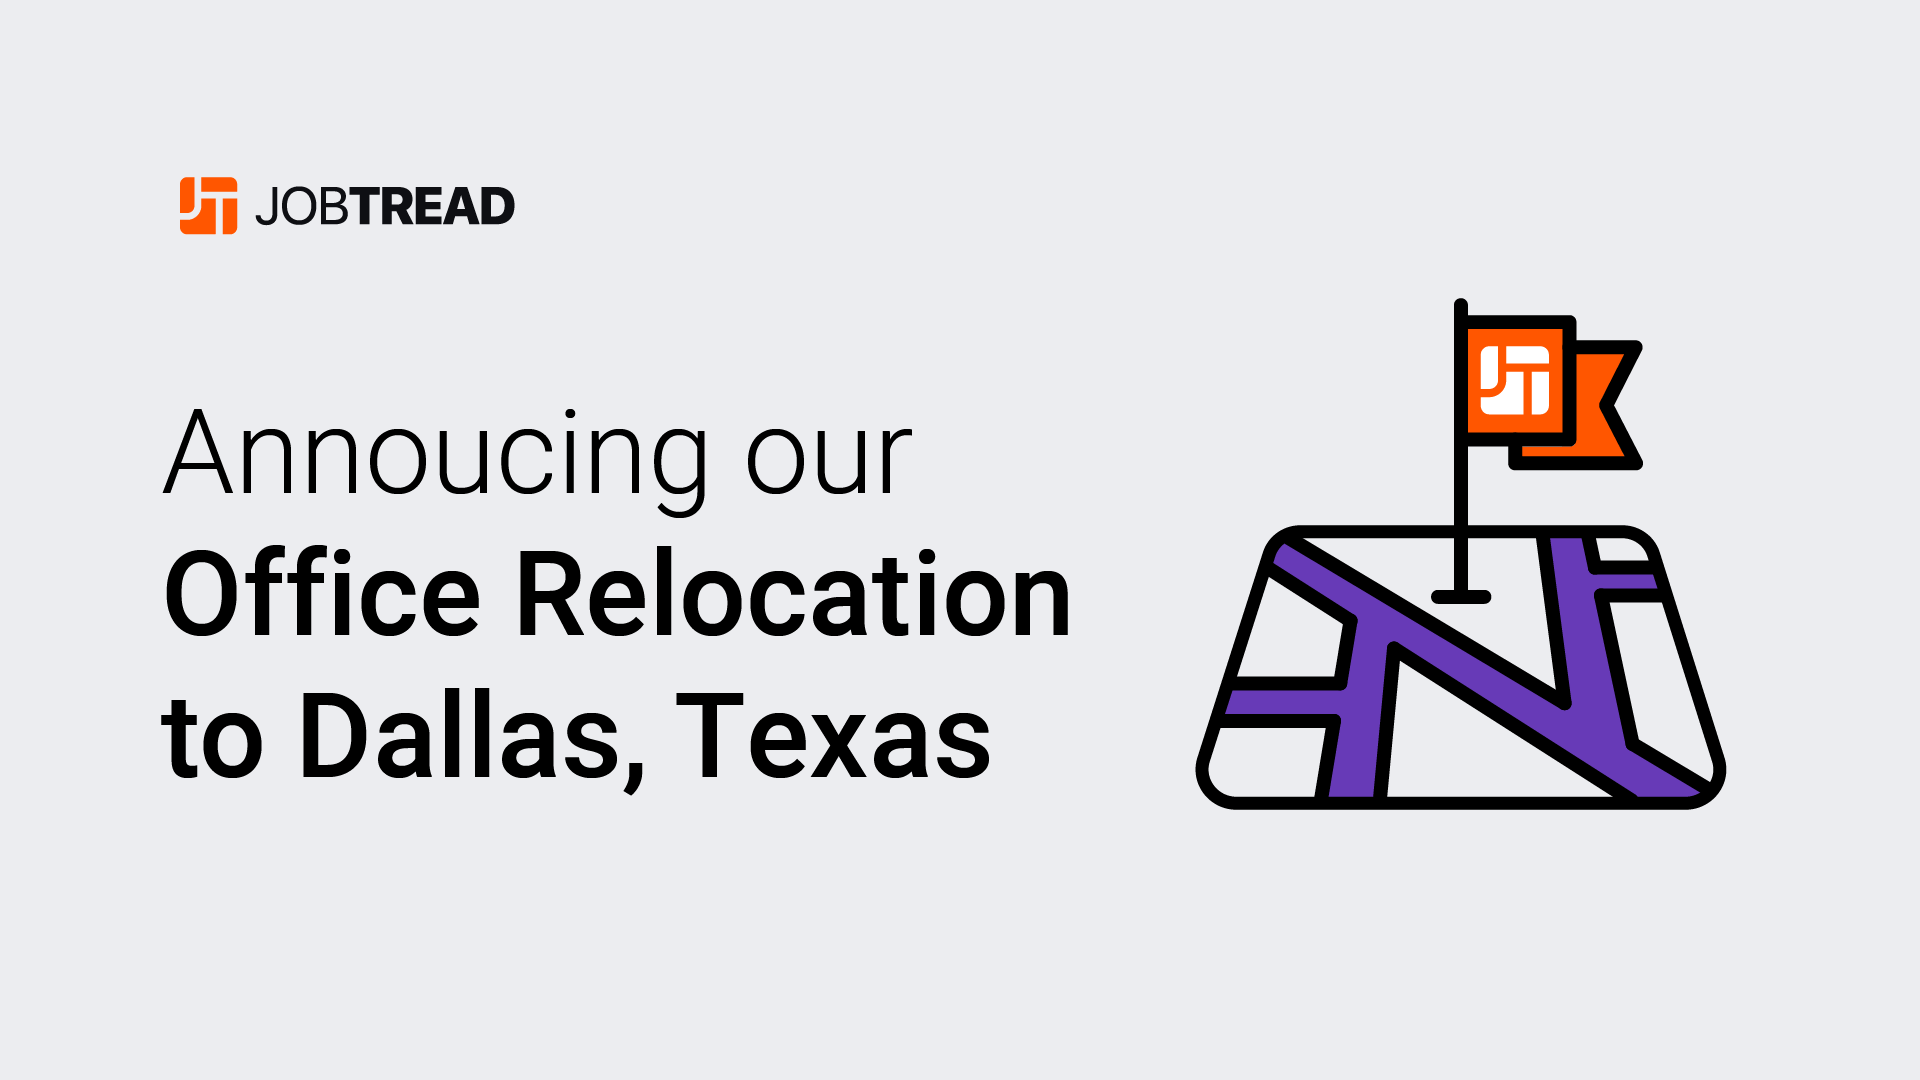 Annoucing our Office Relocation to Dallas, Texas